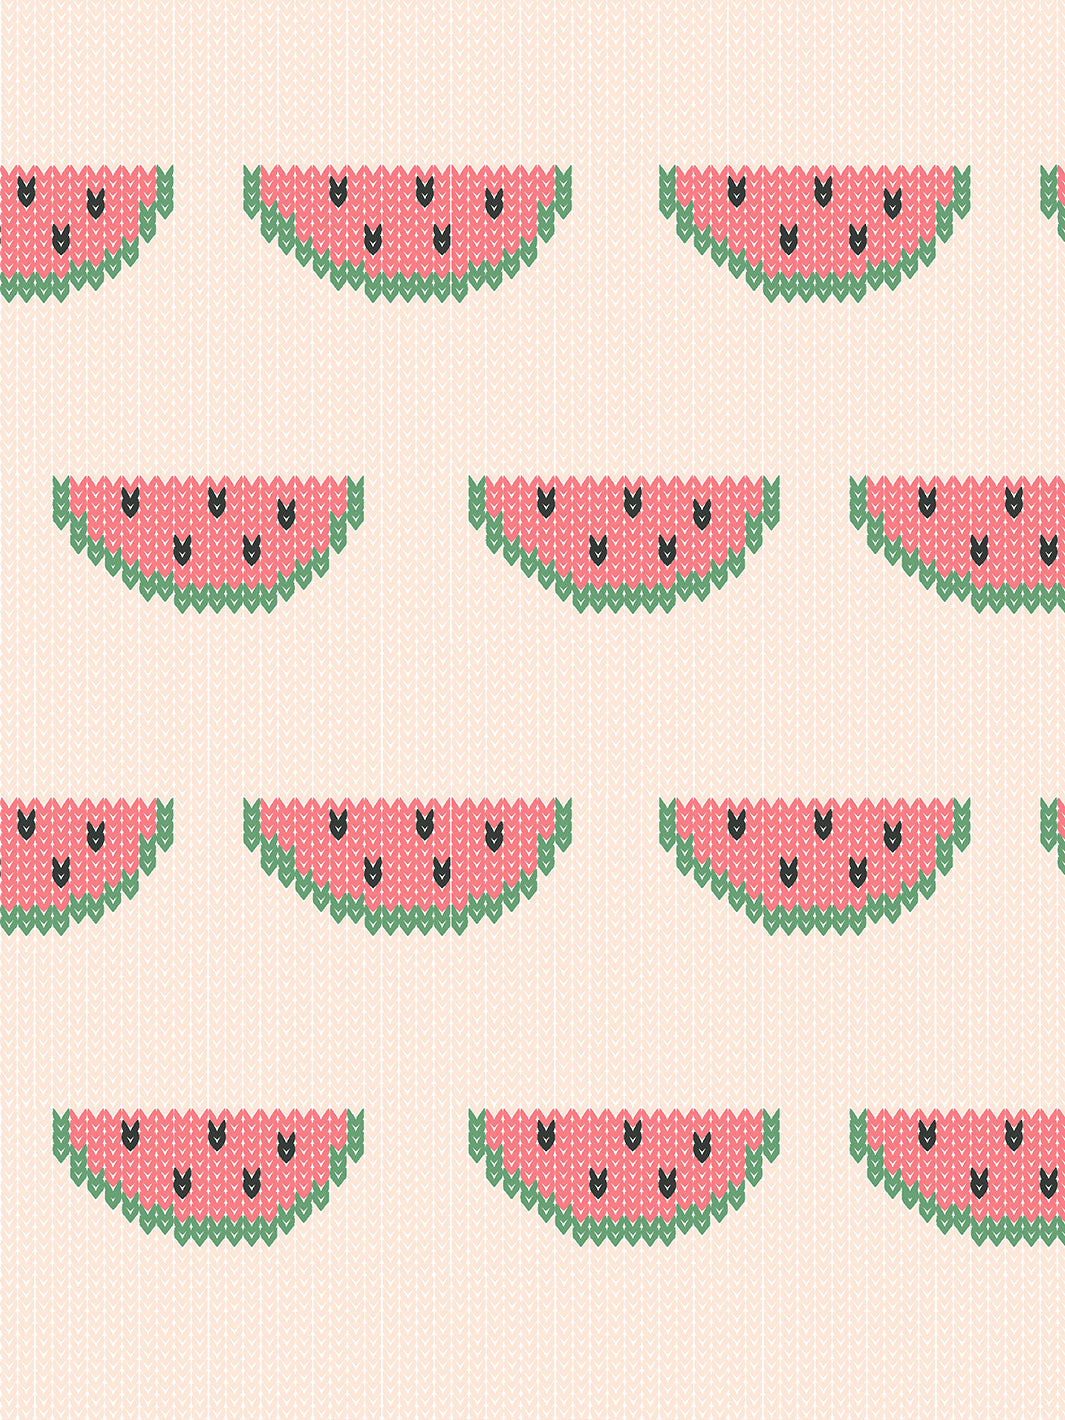 'Watermelon Knit' Wallpaper by Tea Collection - Peach